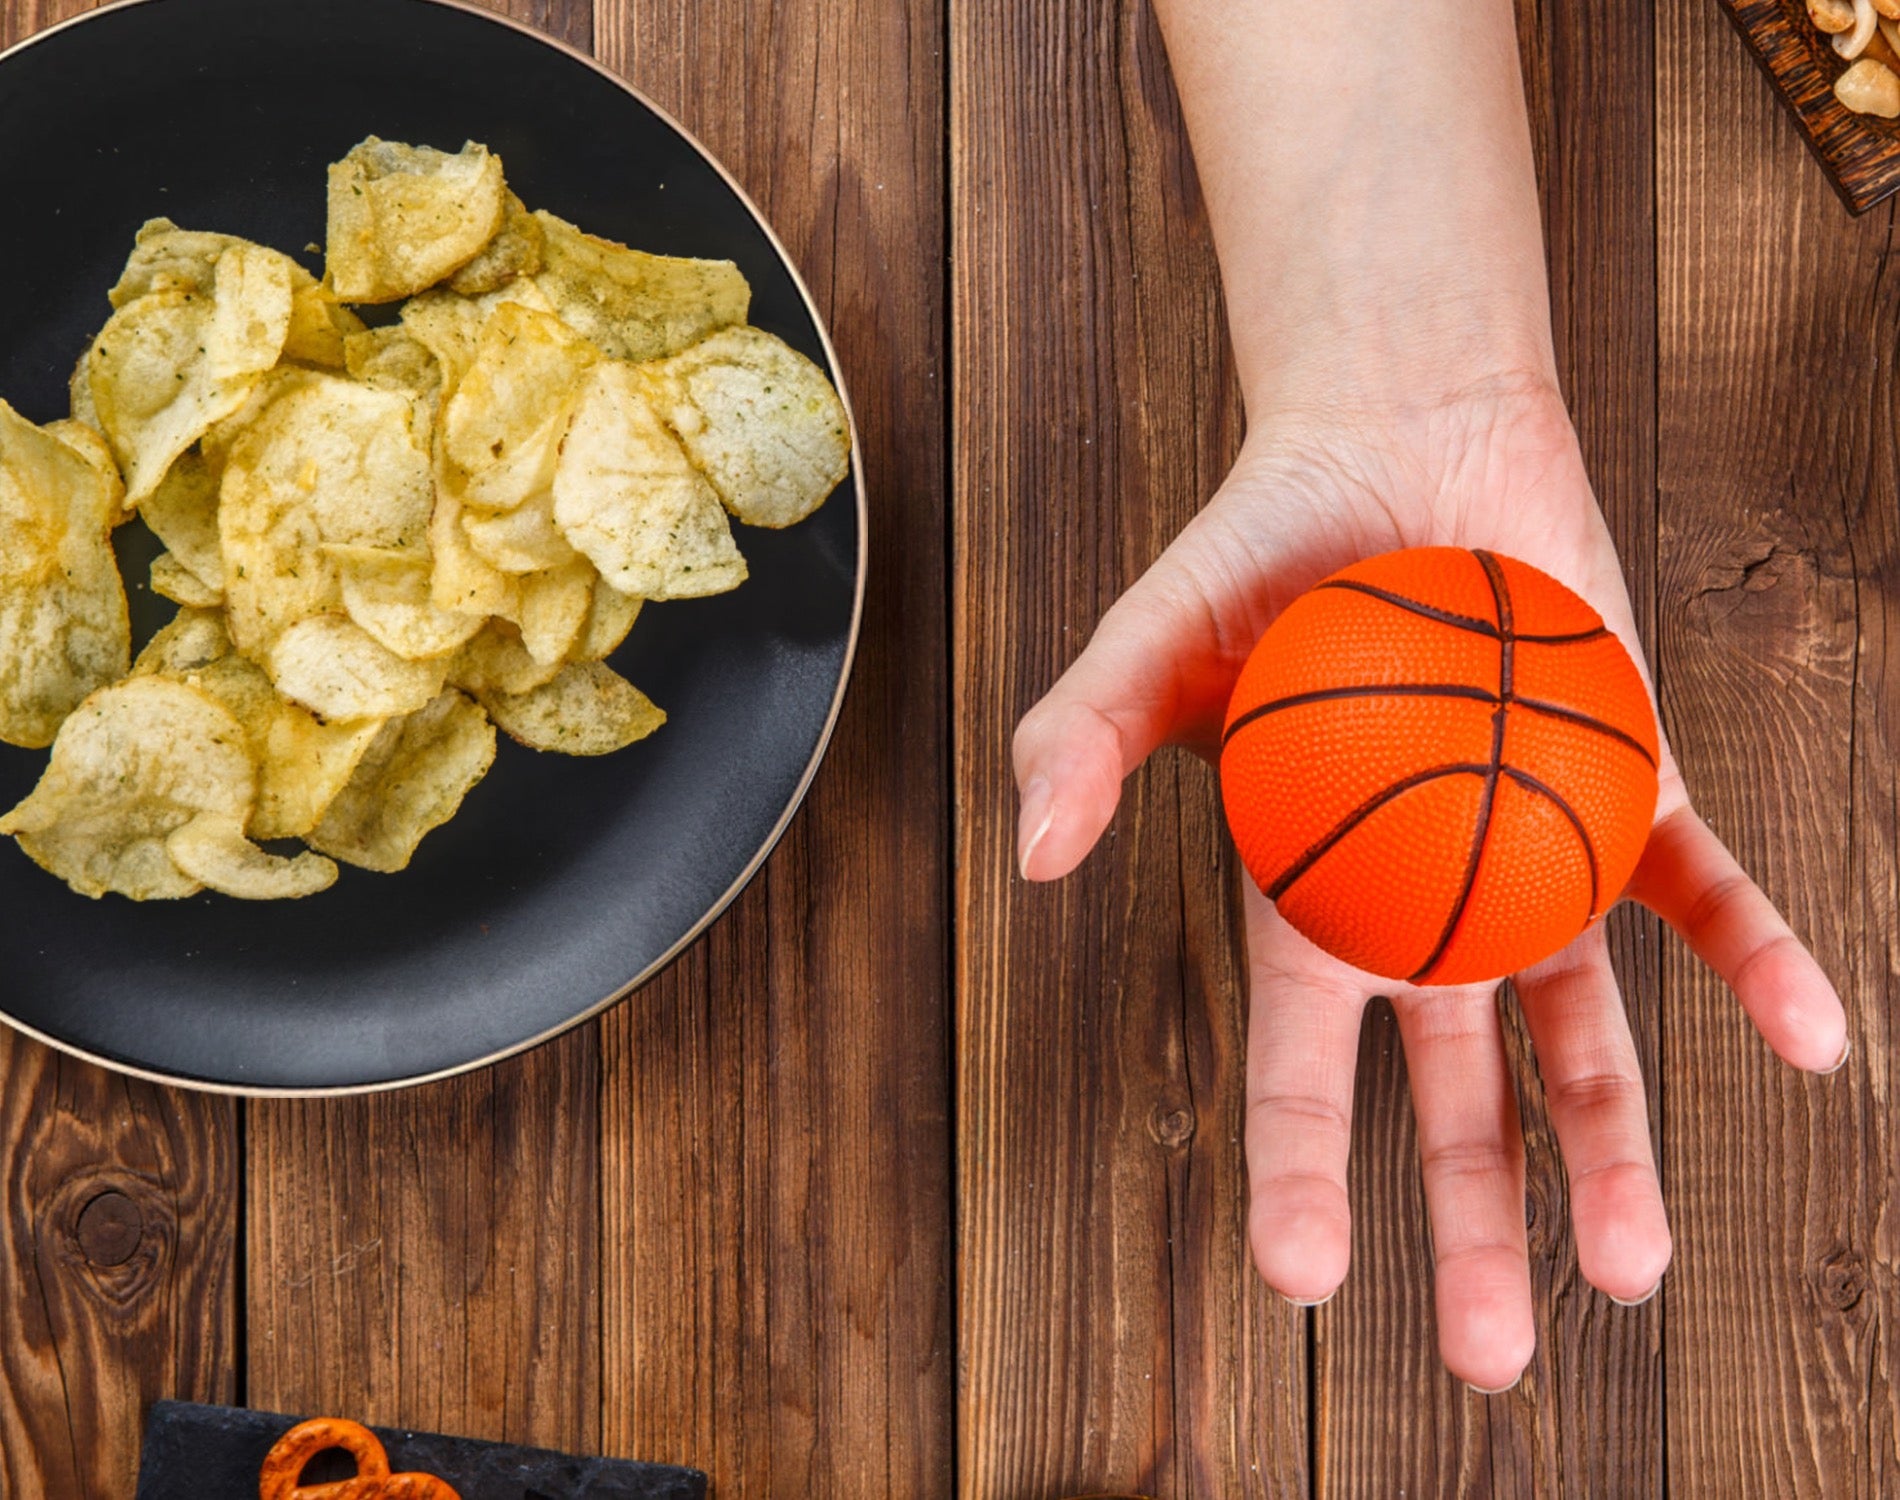 How to Host a Fun March Madness Party?